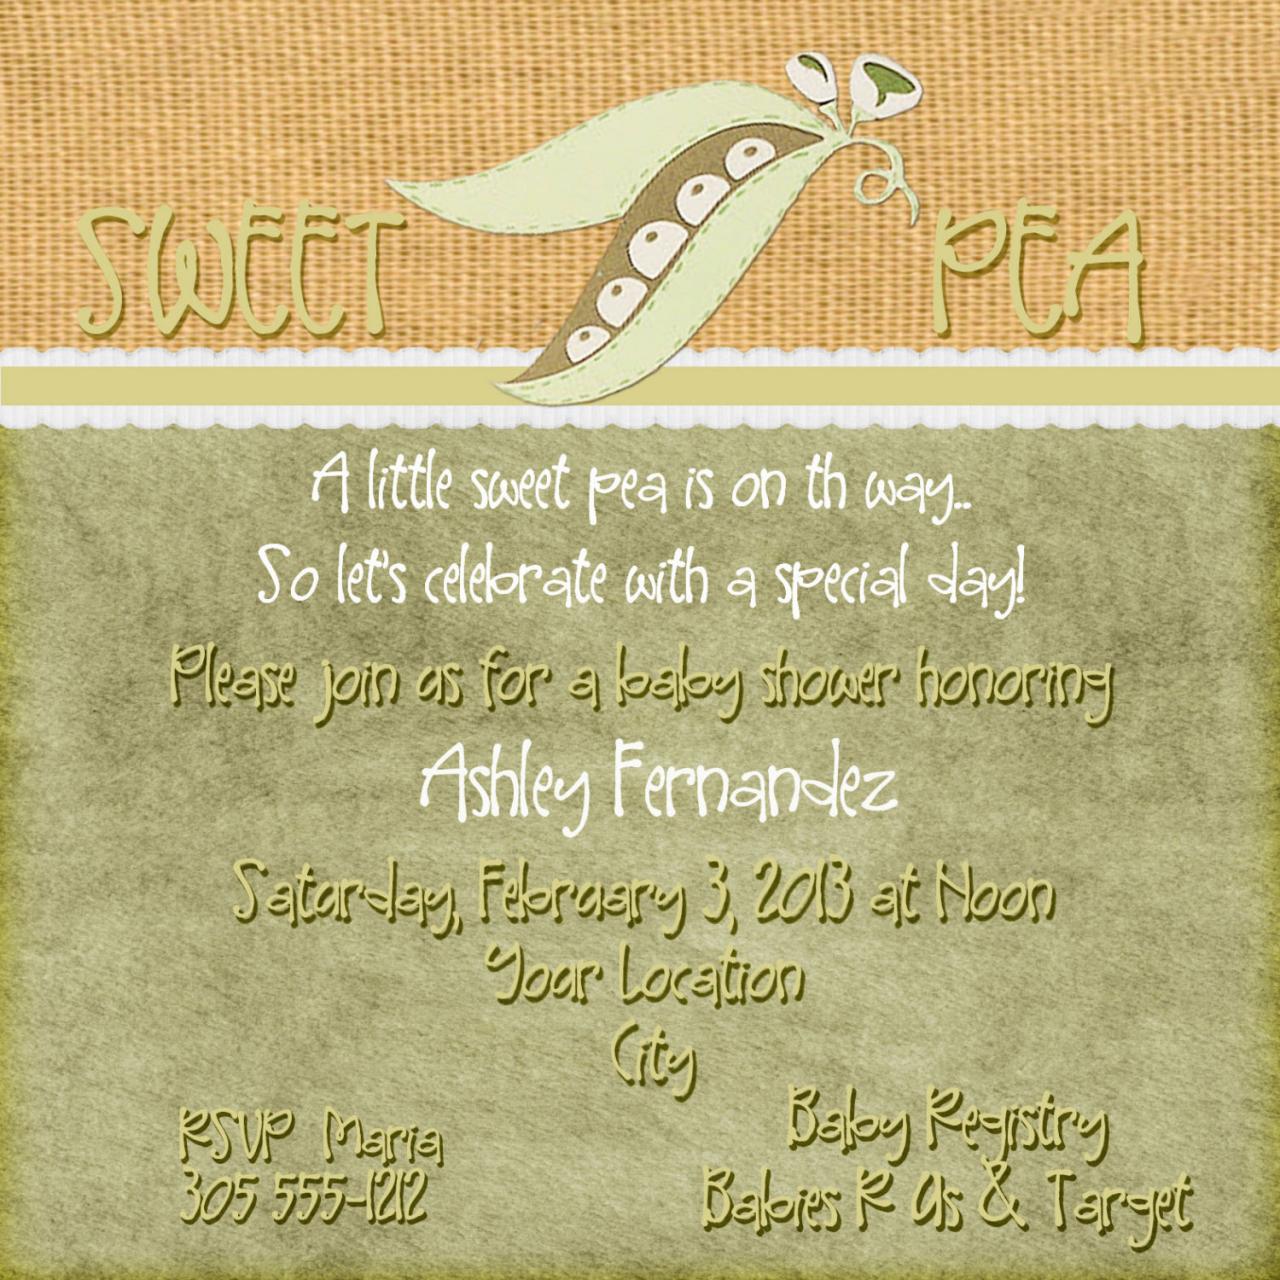 Baby Shower Invitation -sweet Pea Rustic 5 X 5 -1 Sided